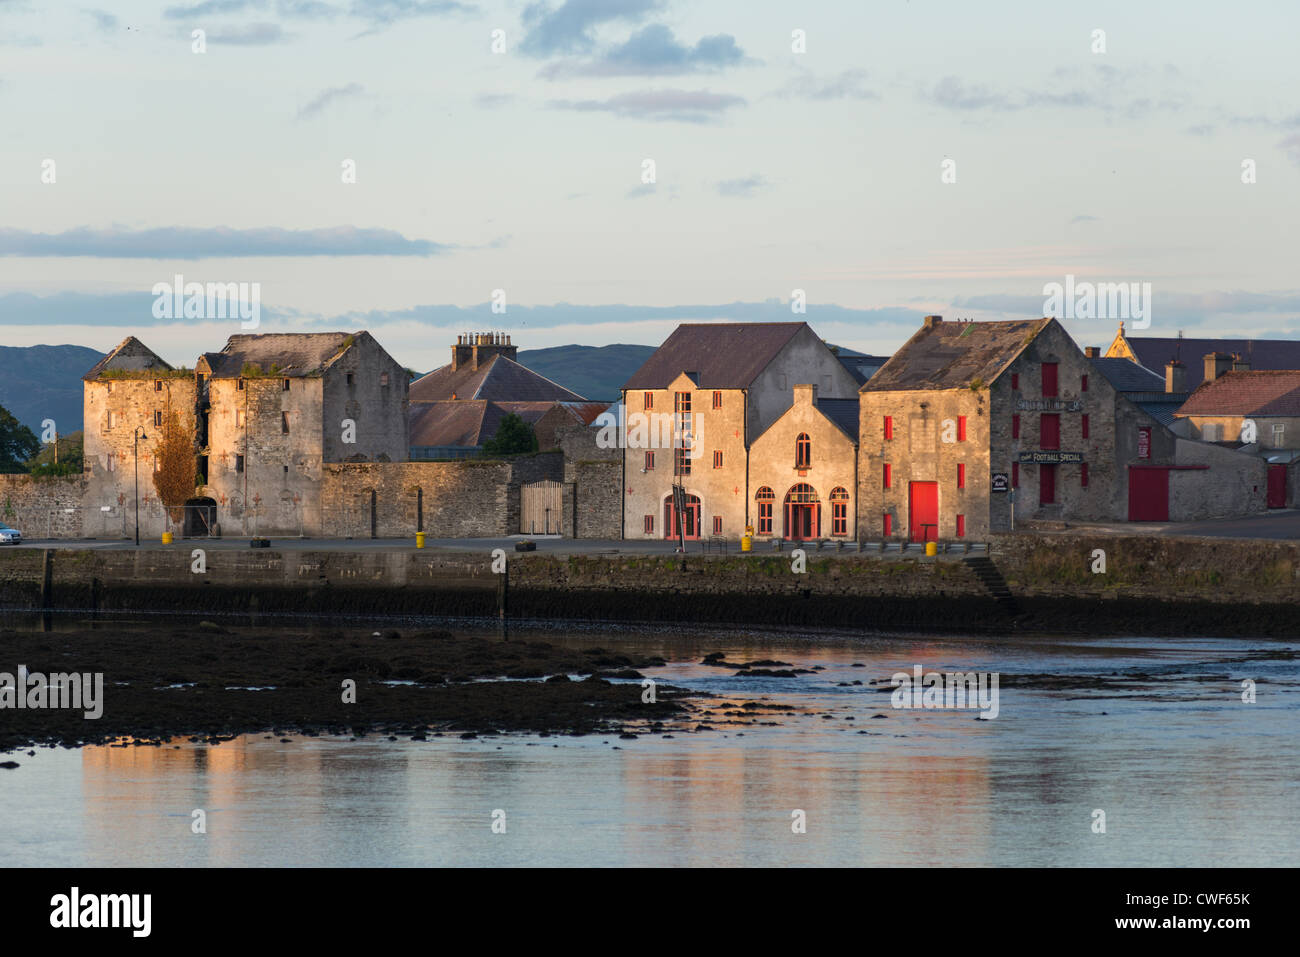 Man fishing with view of warehouses on the waterfront, Rathmelton, County Donegal, Ulster Province, Republic of Ireland. Stock Photo